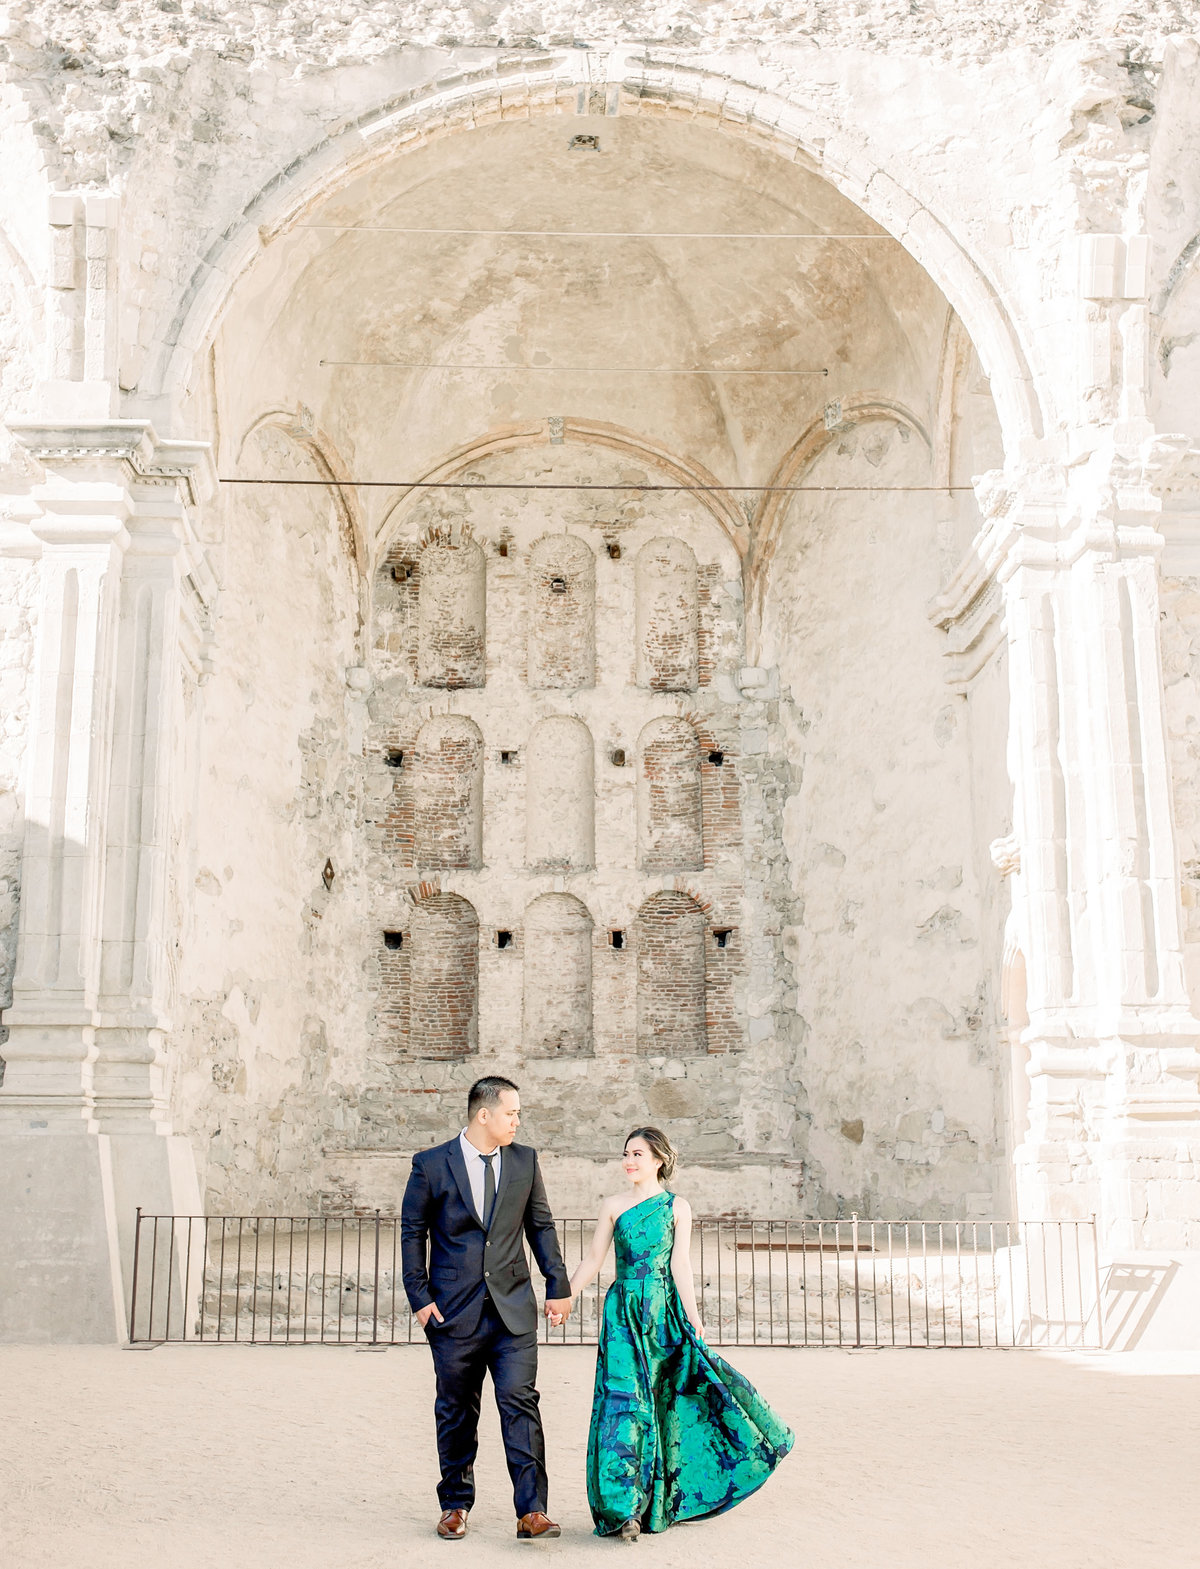 Babsie-Ly-Photography-San-Juan-Capistrano-Missions-Engagement-Session-Asian-Photographer-012